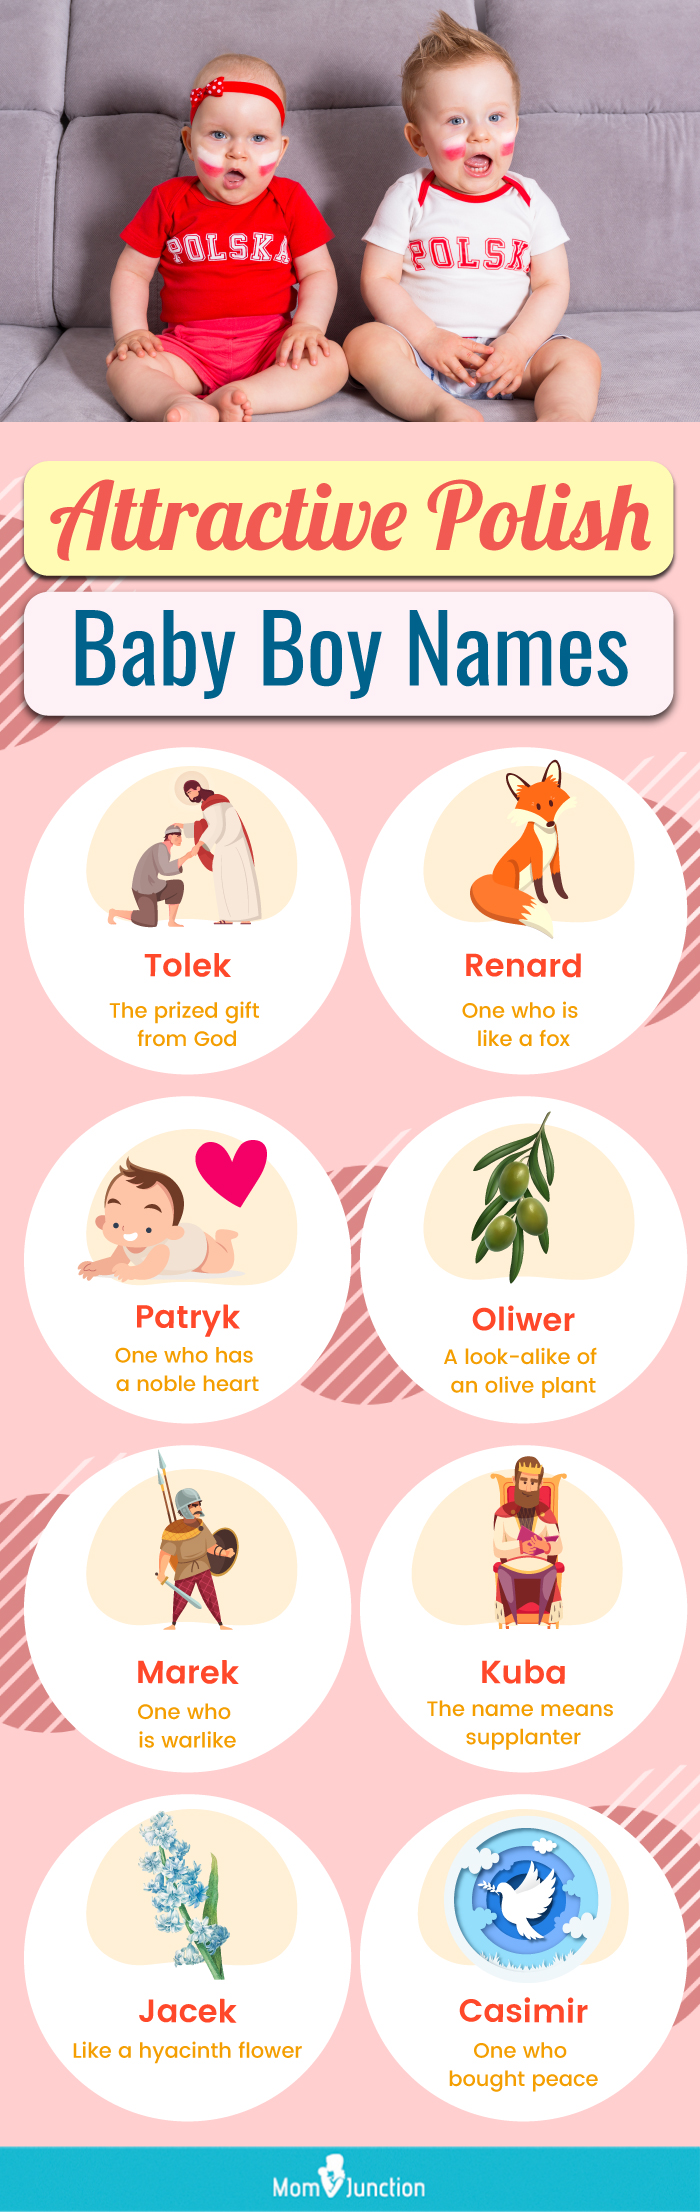 attractive polish baby boy names (infographic)